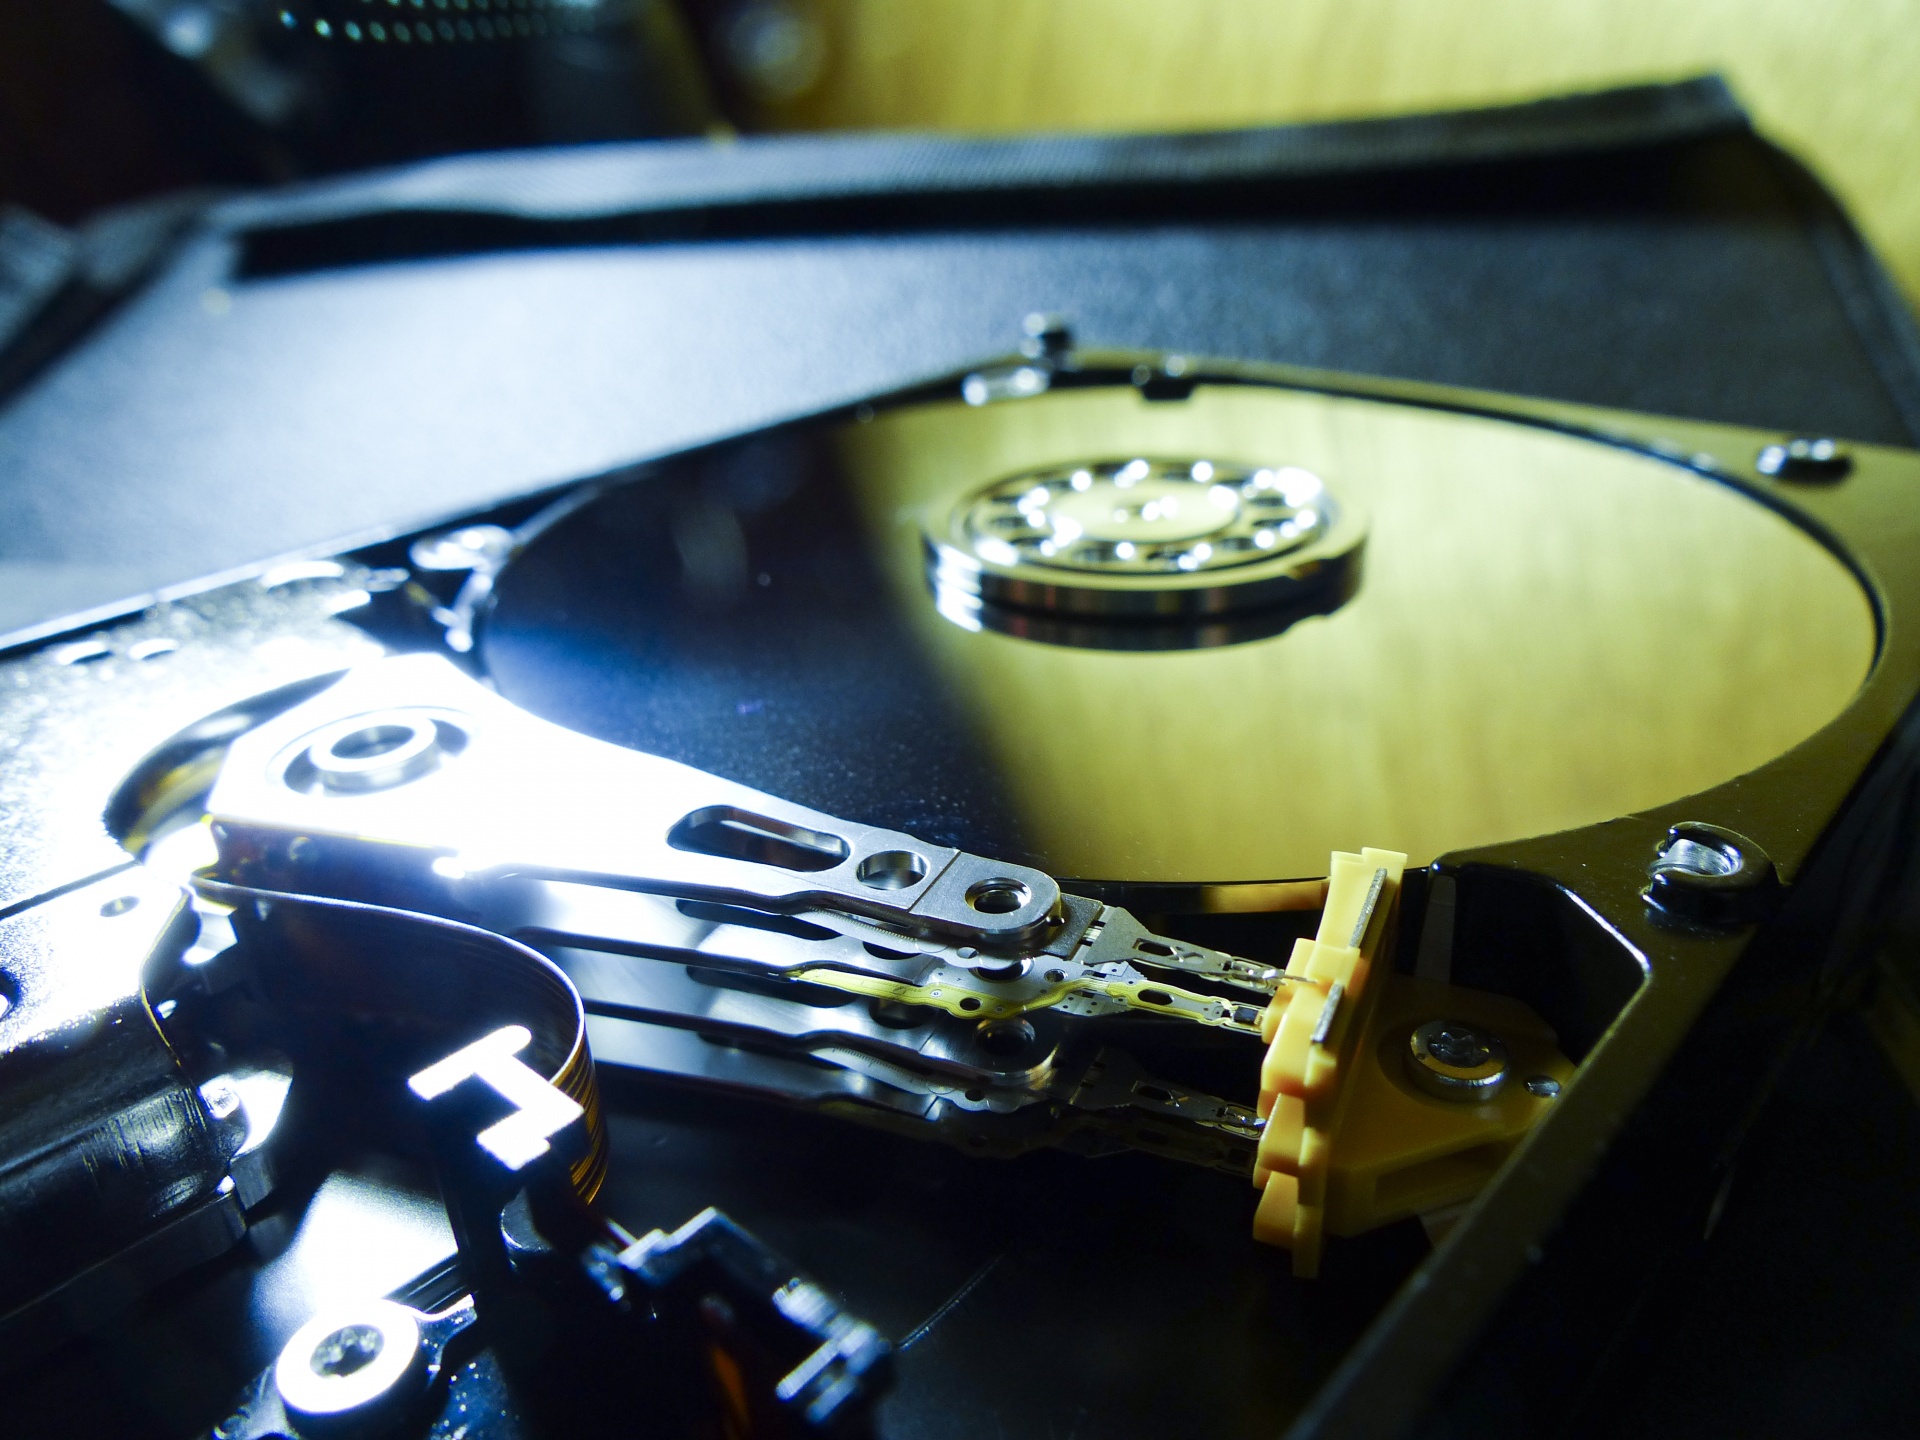 Golden disc and arm of a computer hard drive. Metal reflects light.